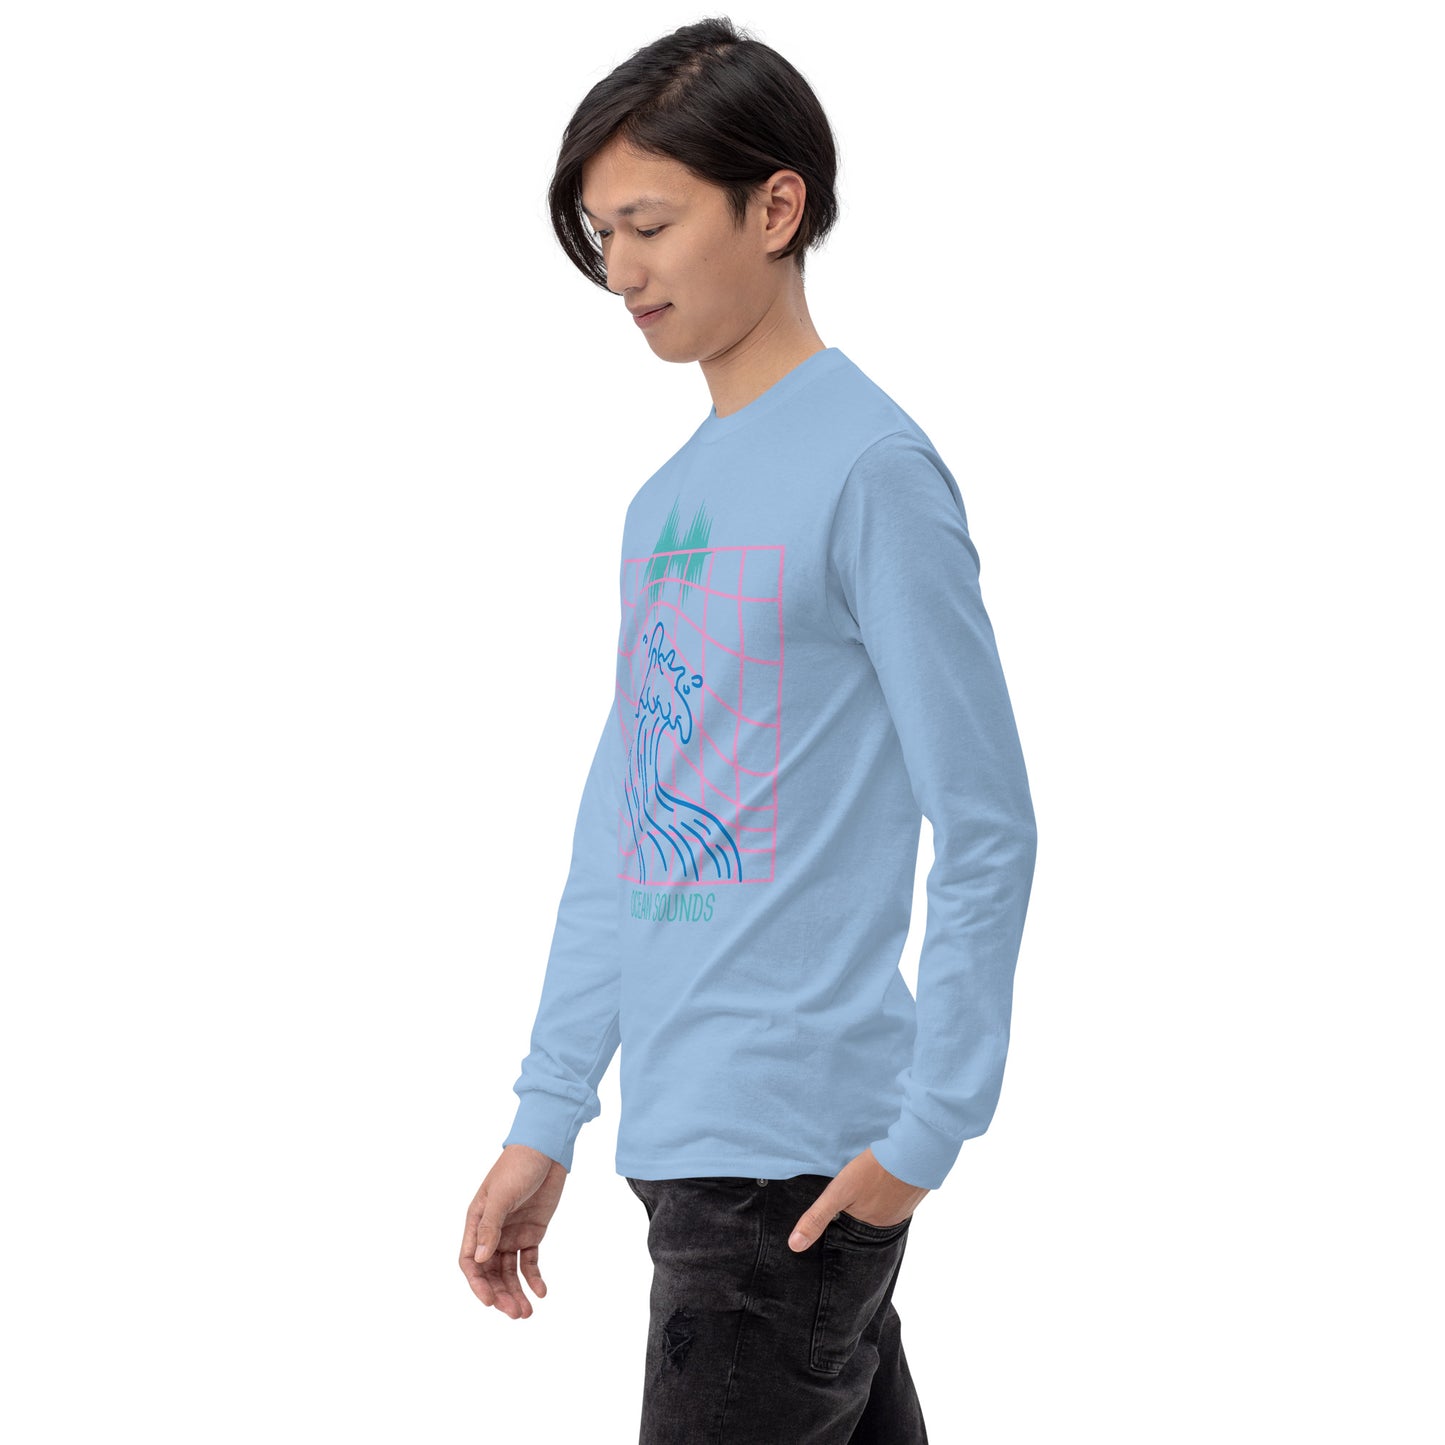 Sounds of the Ocean Men’s Long Sleeve Cotton Shirt By Our BoatyVerse